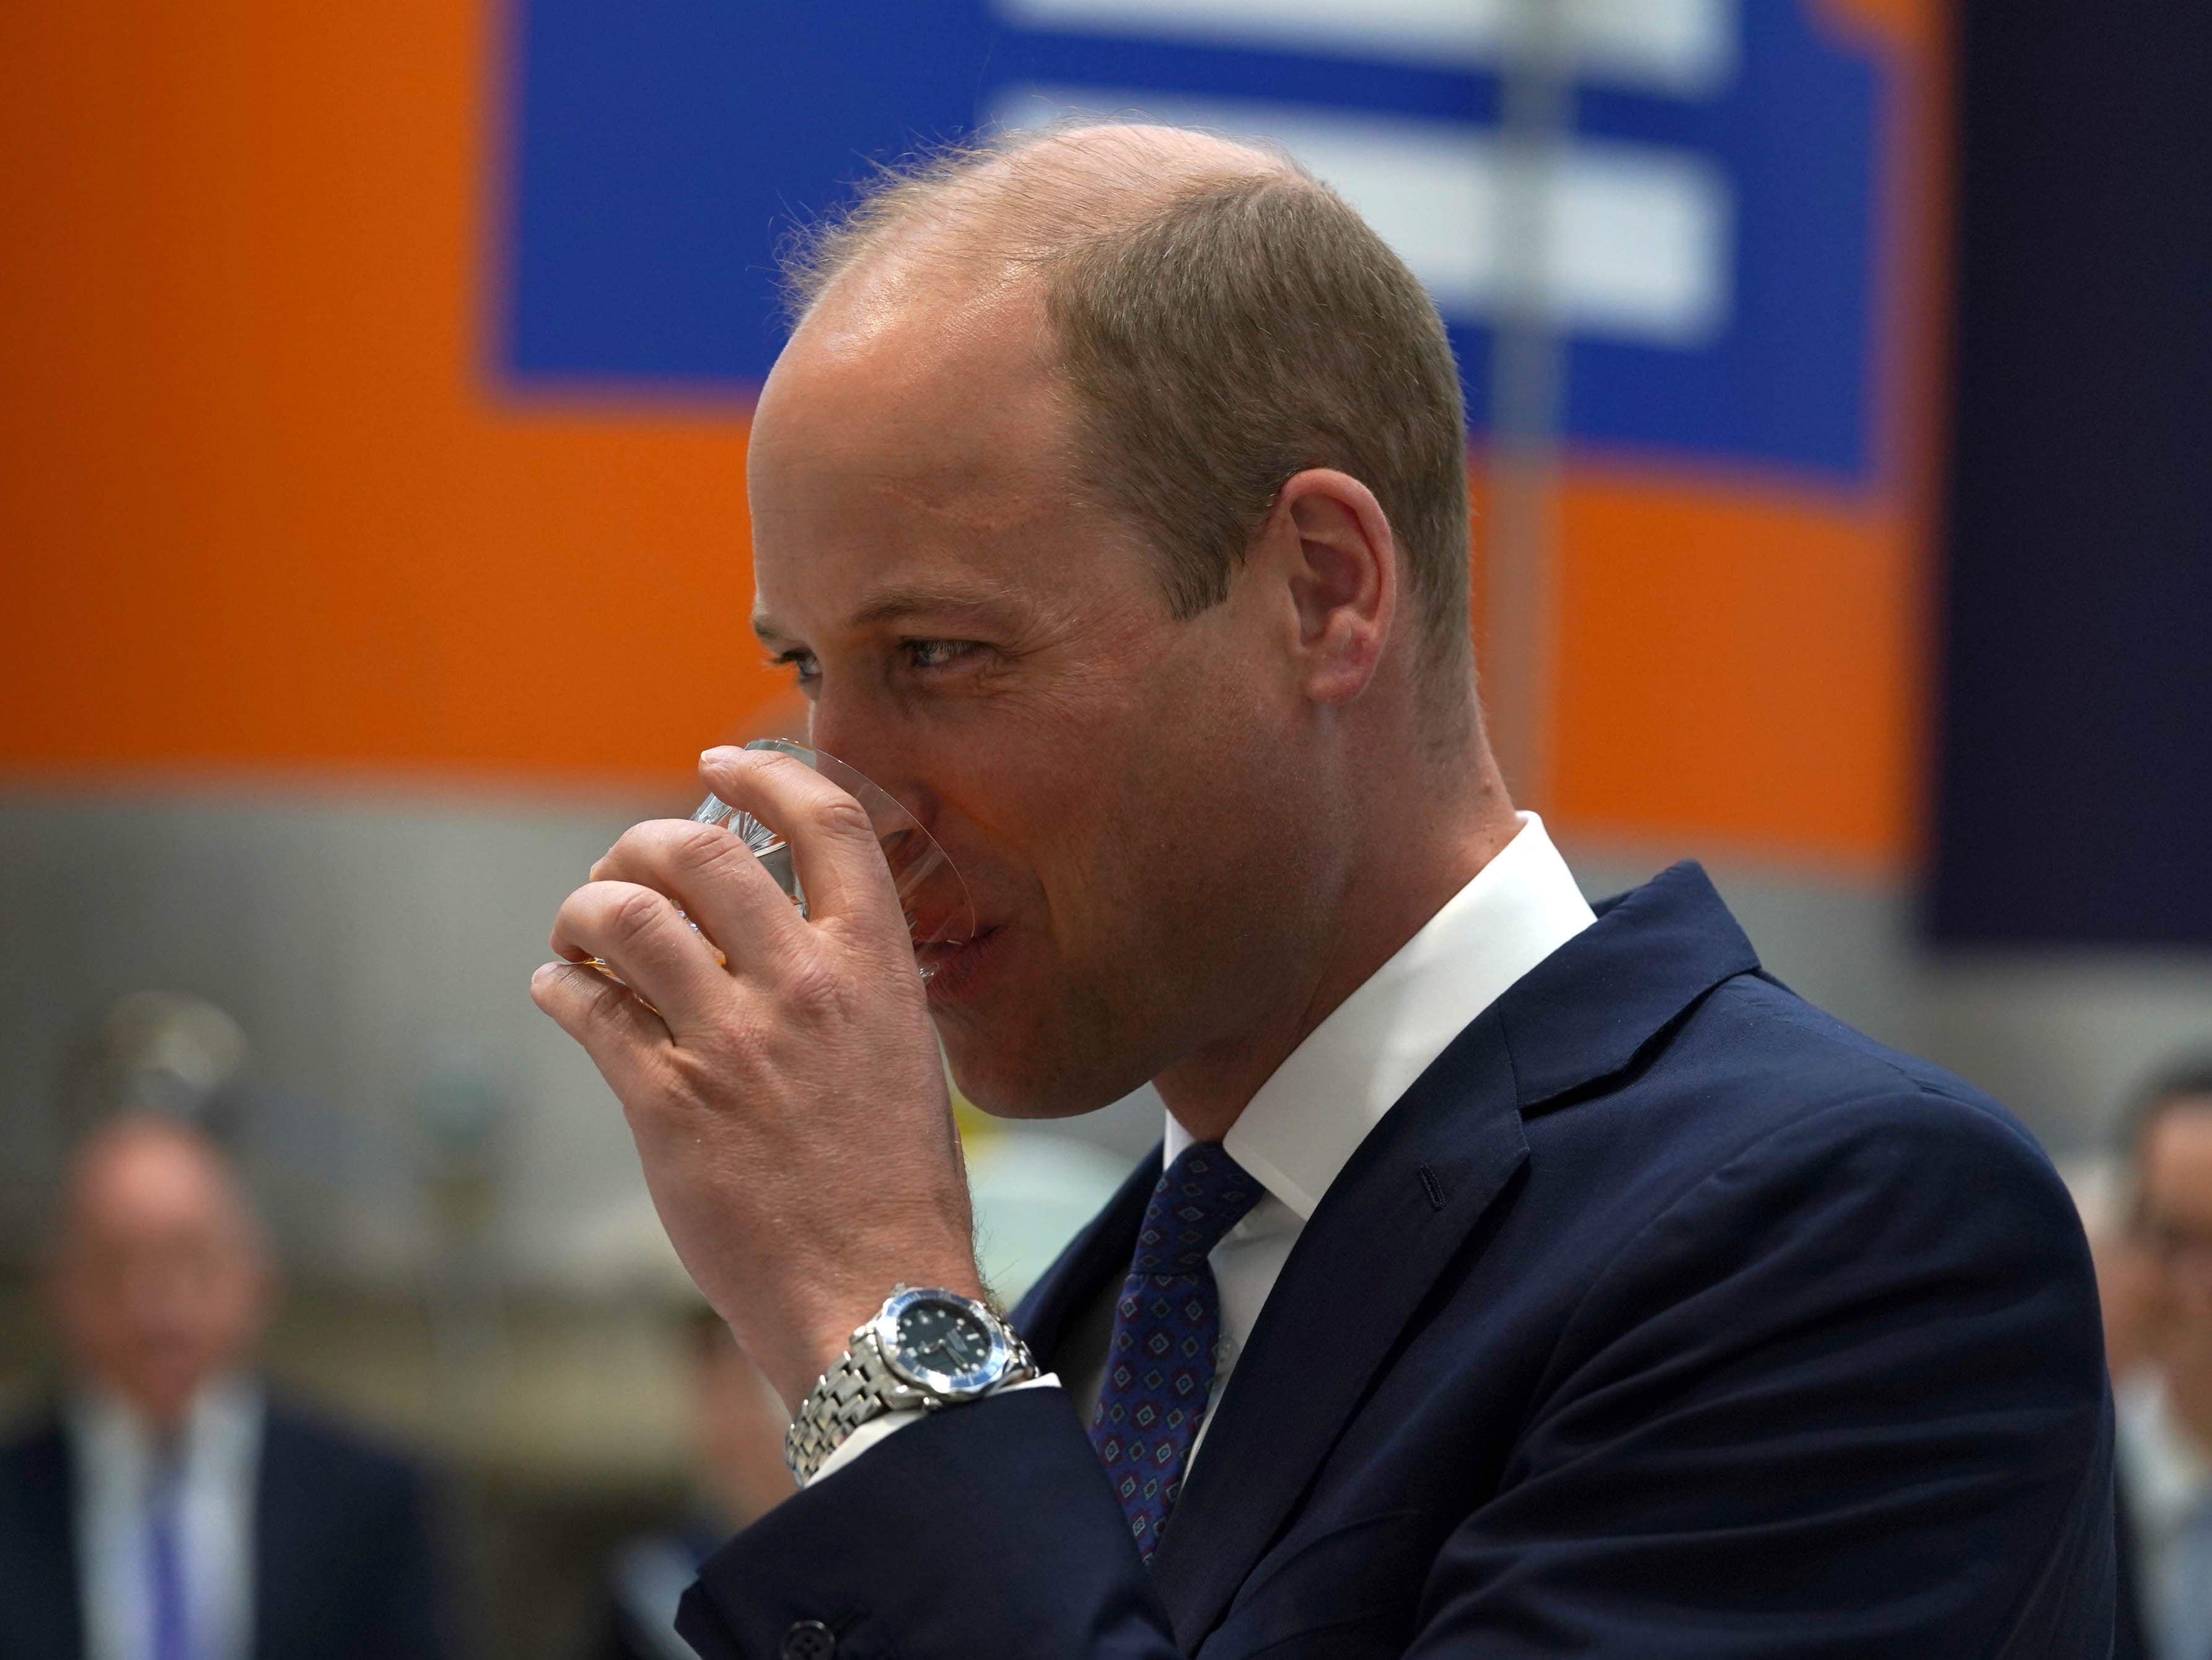 The Duke of Cambridge, known as the Earl of Strathearn in Scotland, tries Irn-Bru during a visit to AG Barr's factory in Cumbernauld